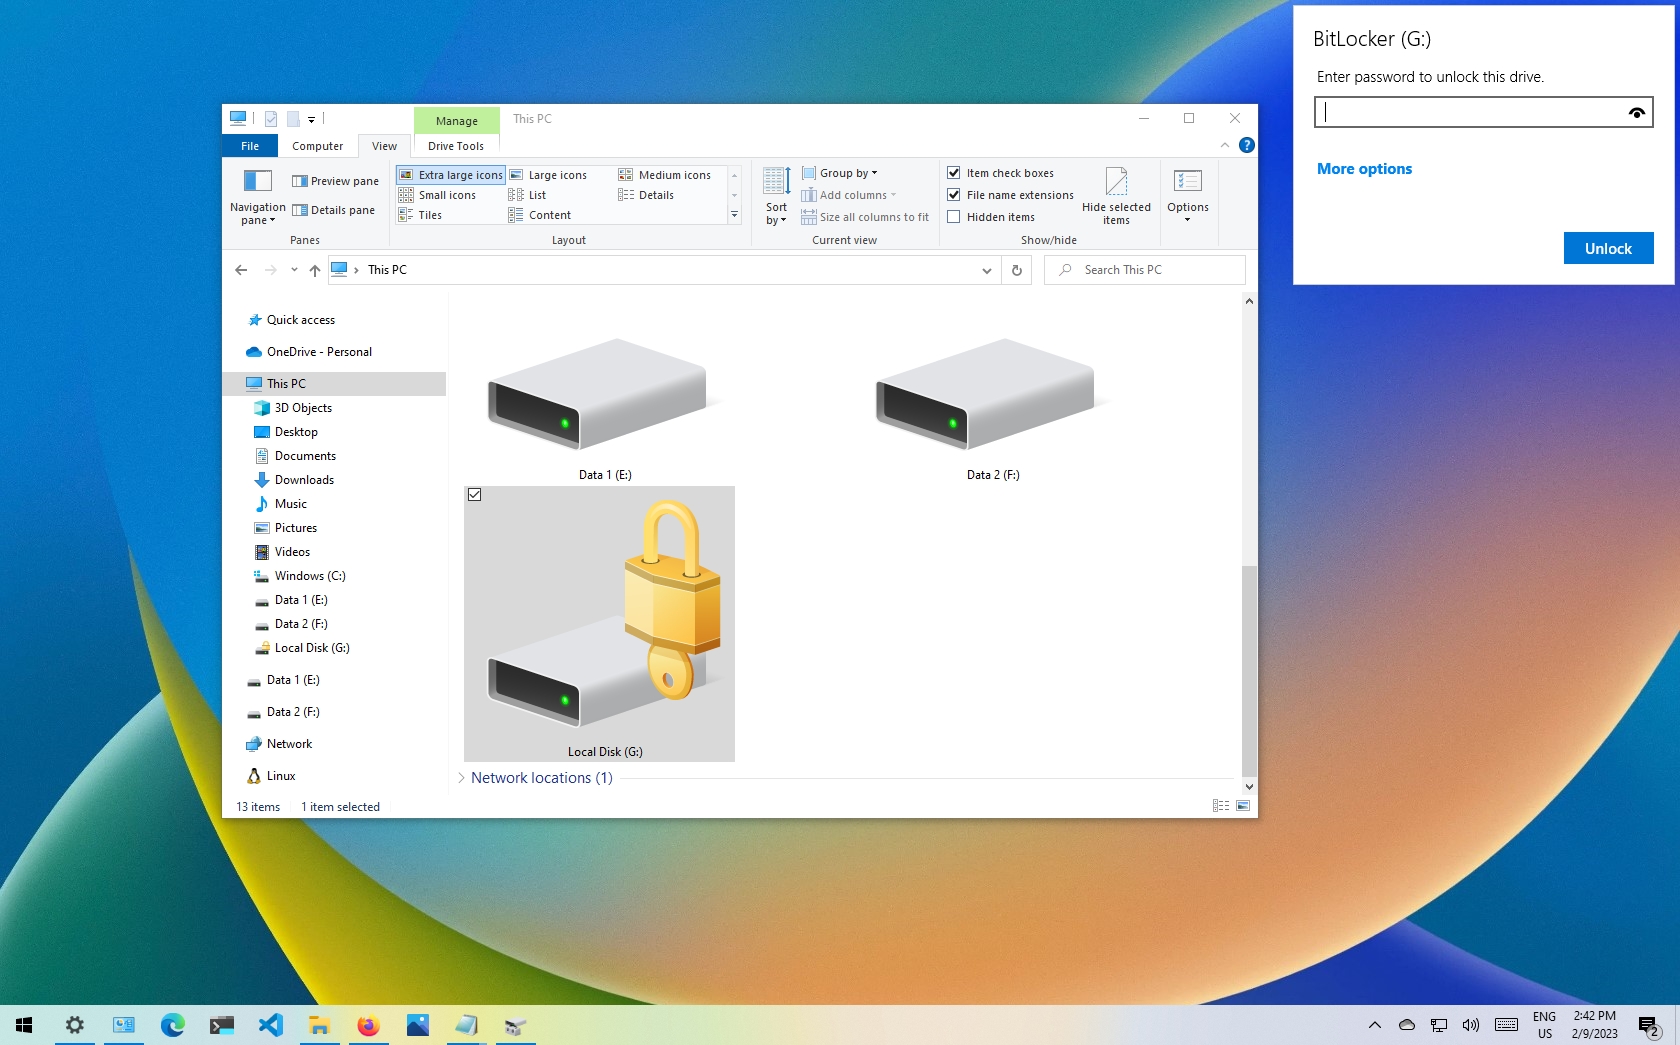 How to password protect a folder on Windows 10